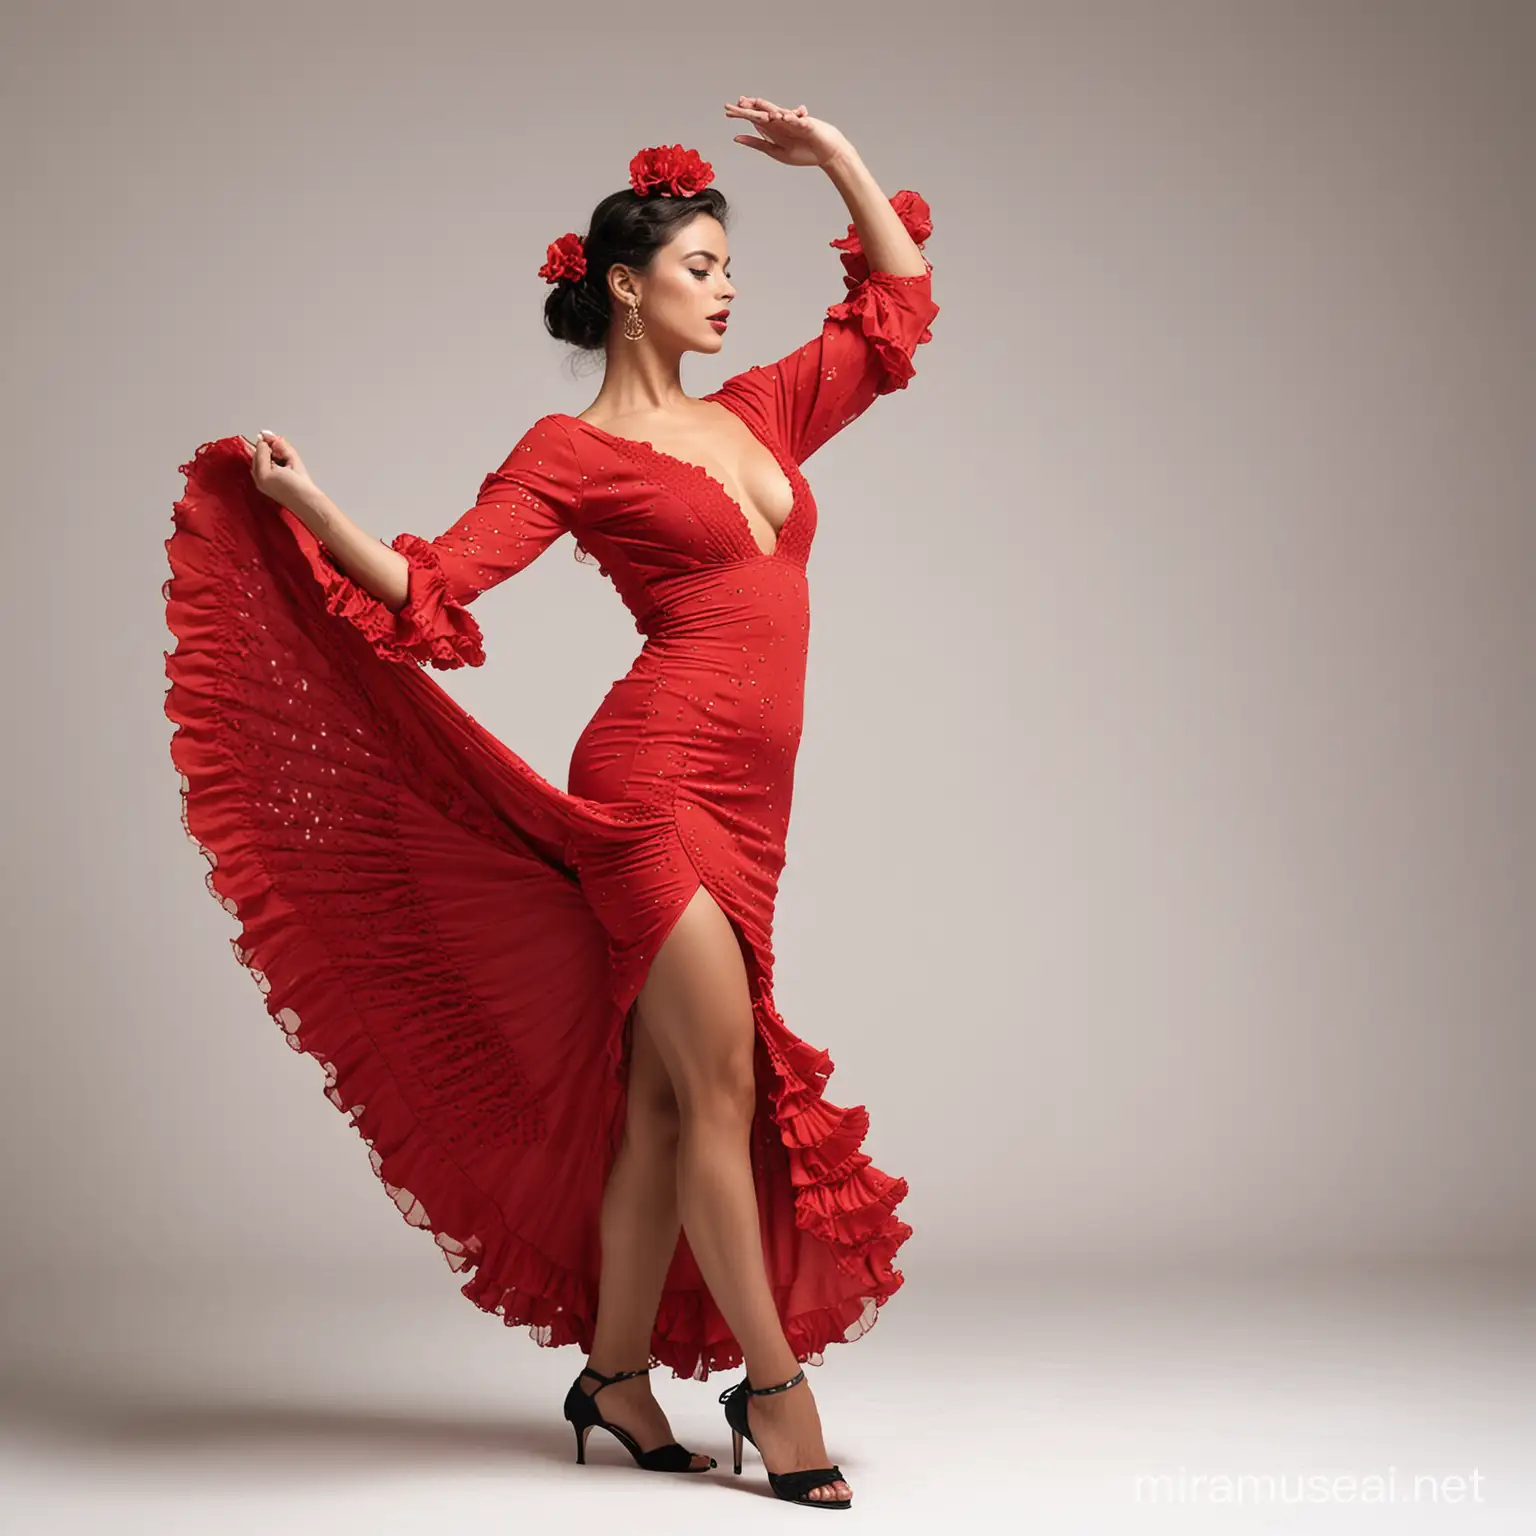 Elegant Flamenco Dancer Performing with Passion on White Background